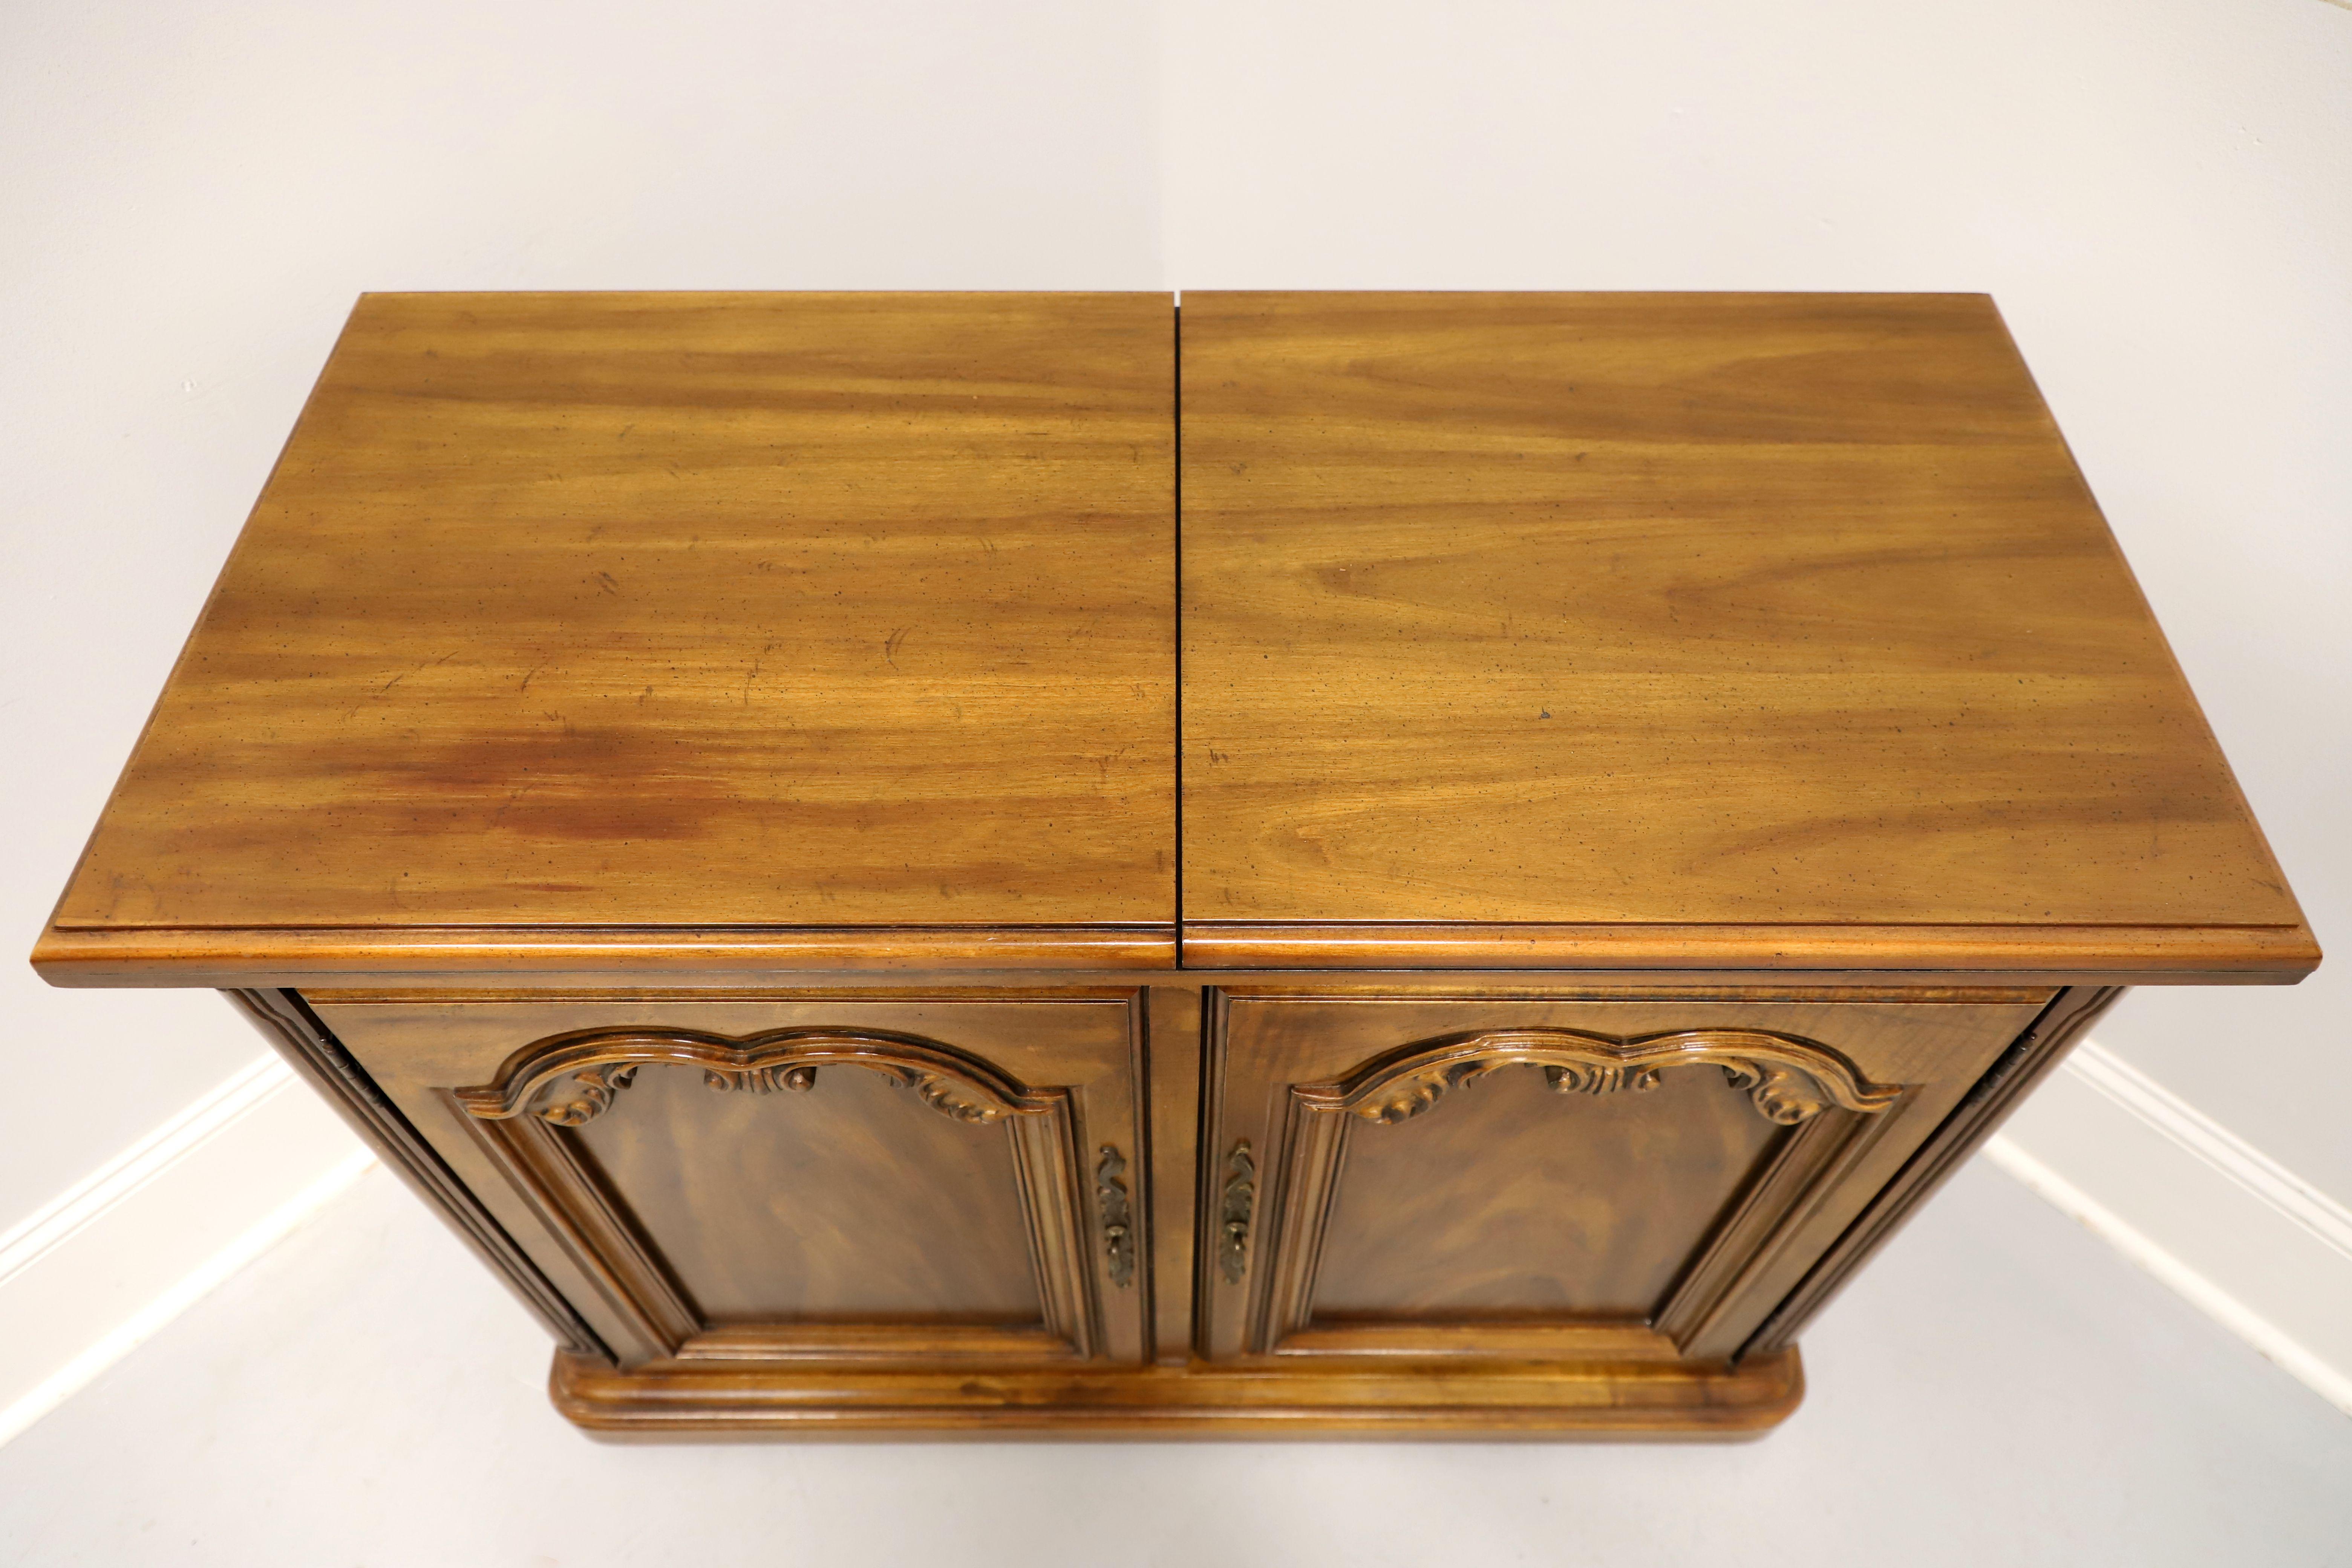 Brass DREXEL Touraine II Pecan French Country Flip Top Server on Casters